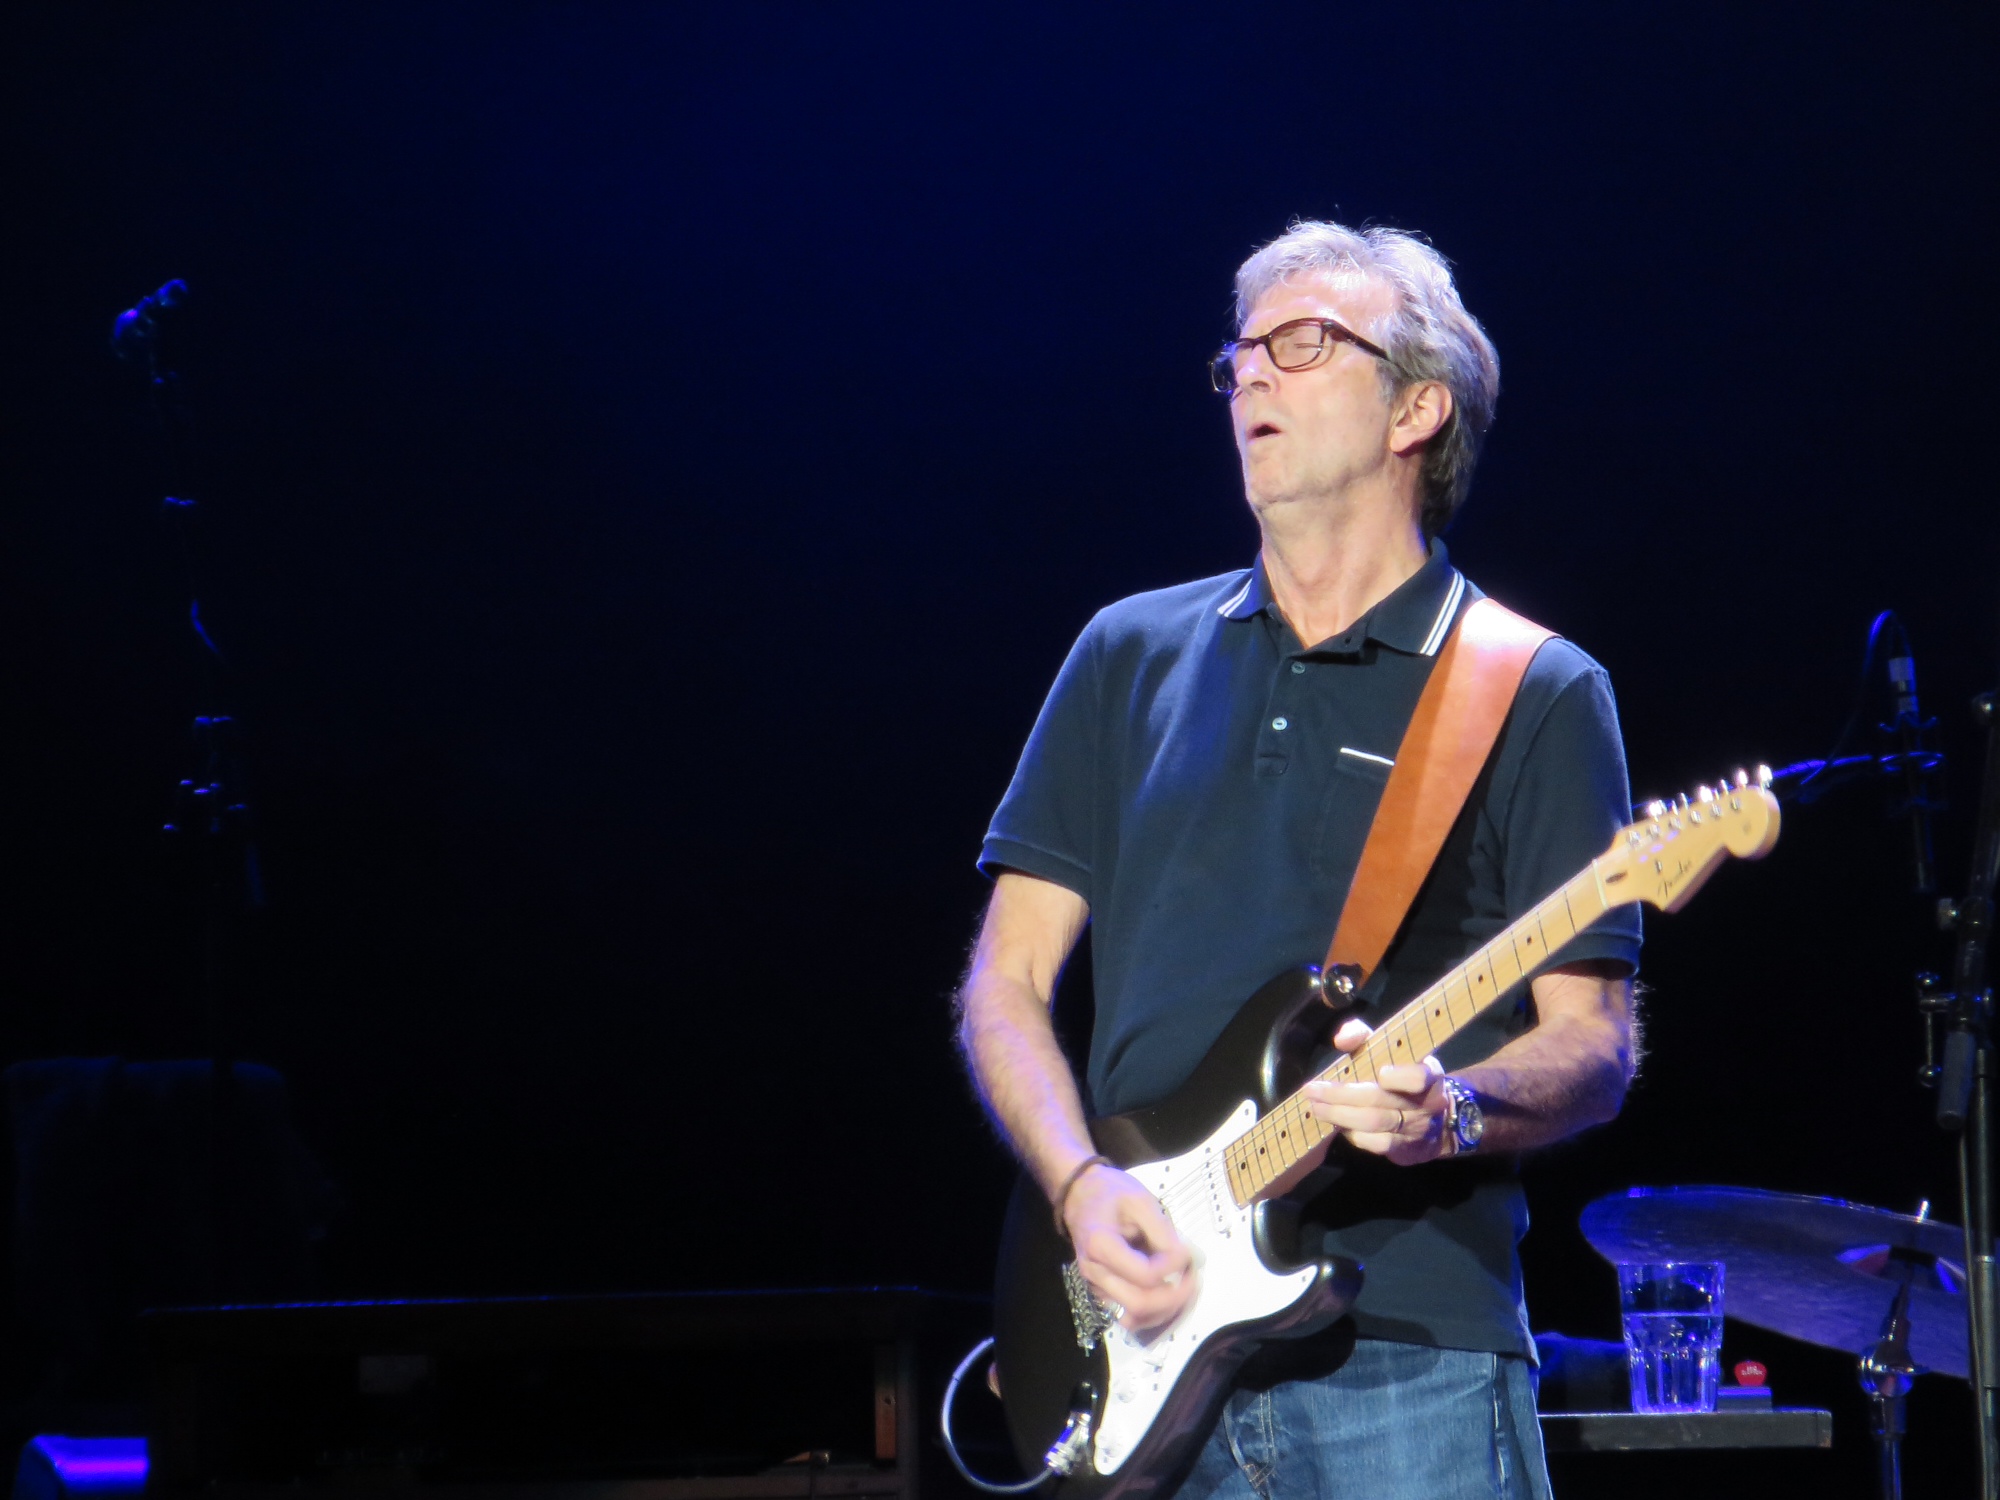 Eric Clapton - RAH 26 May 2013 - Photo by Ross and Joanne North Sandwich NH